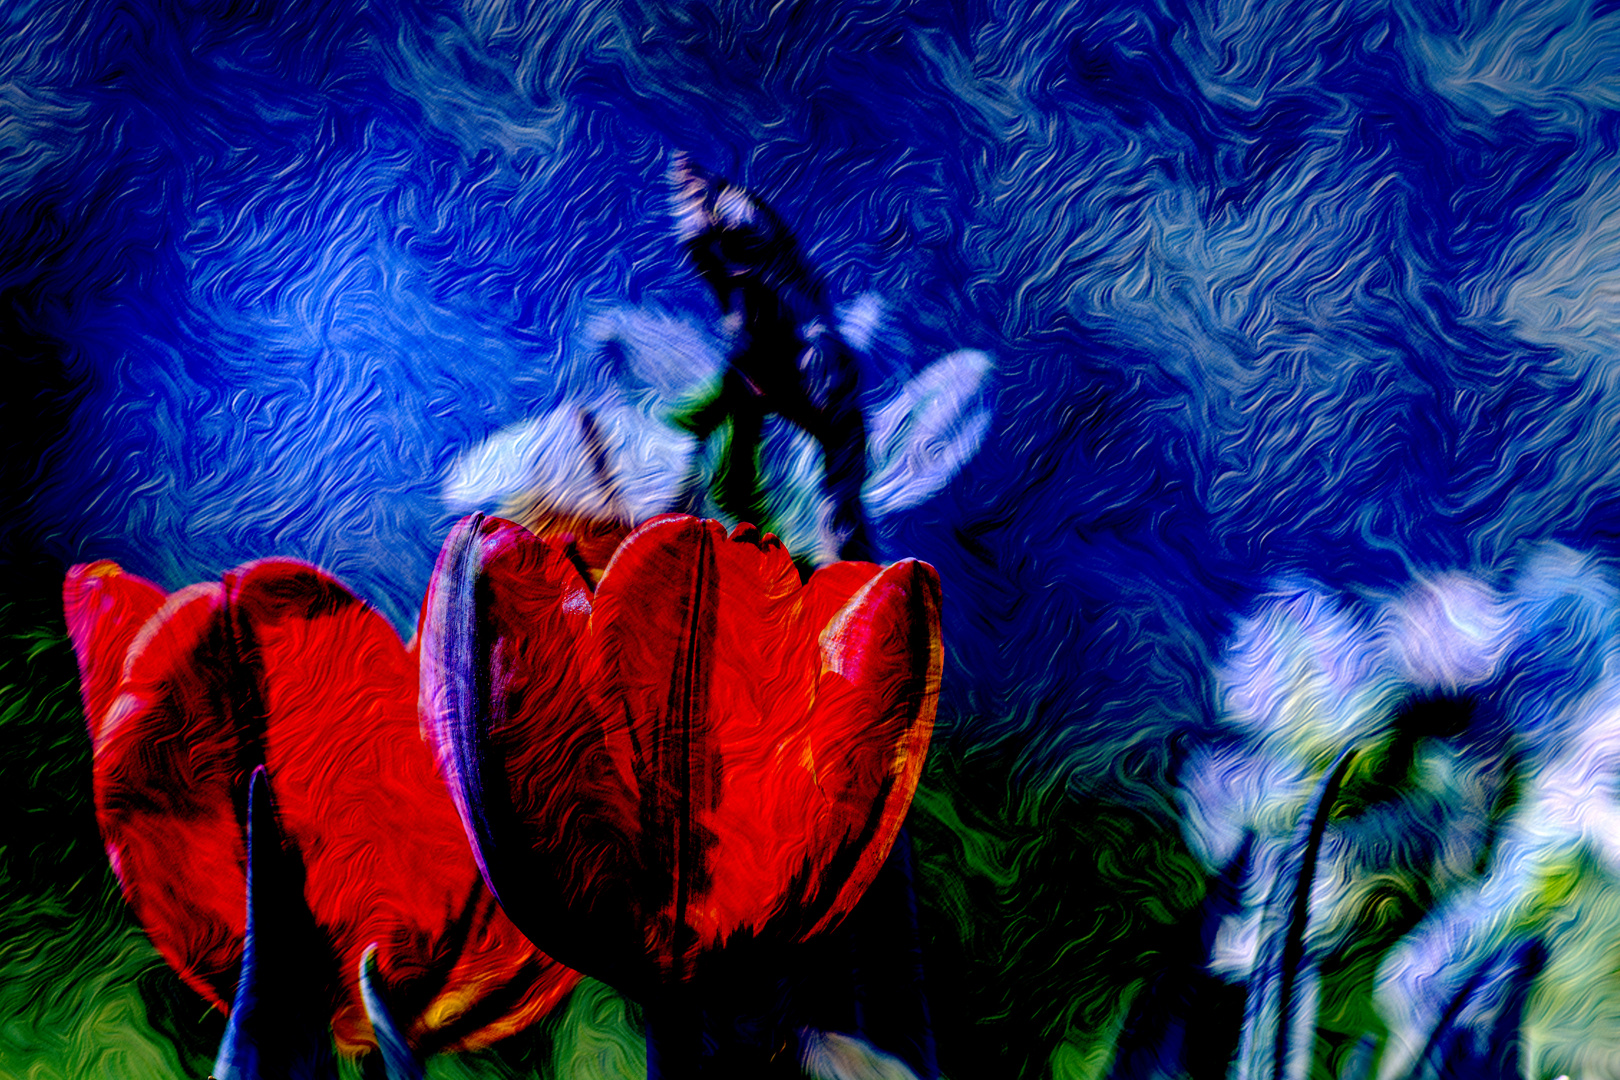 ABSTRACT : FLORA - RED TULIPS